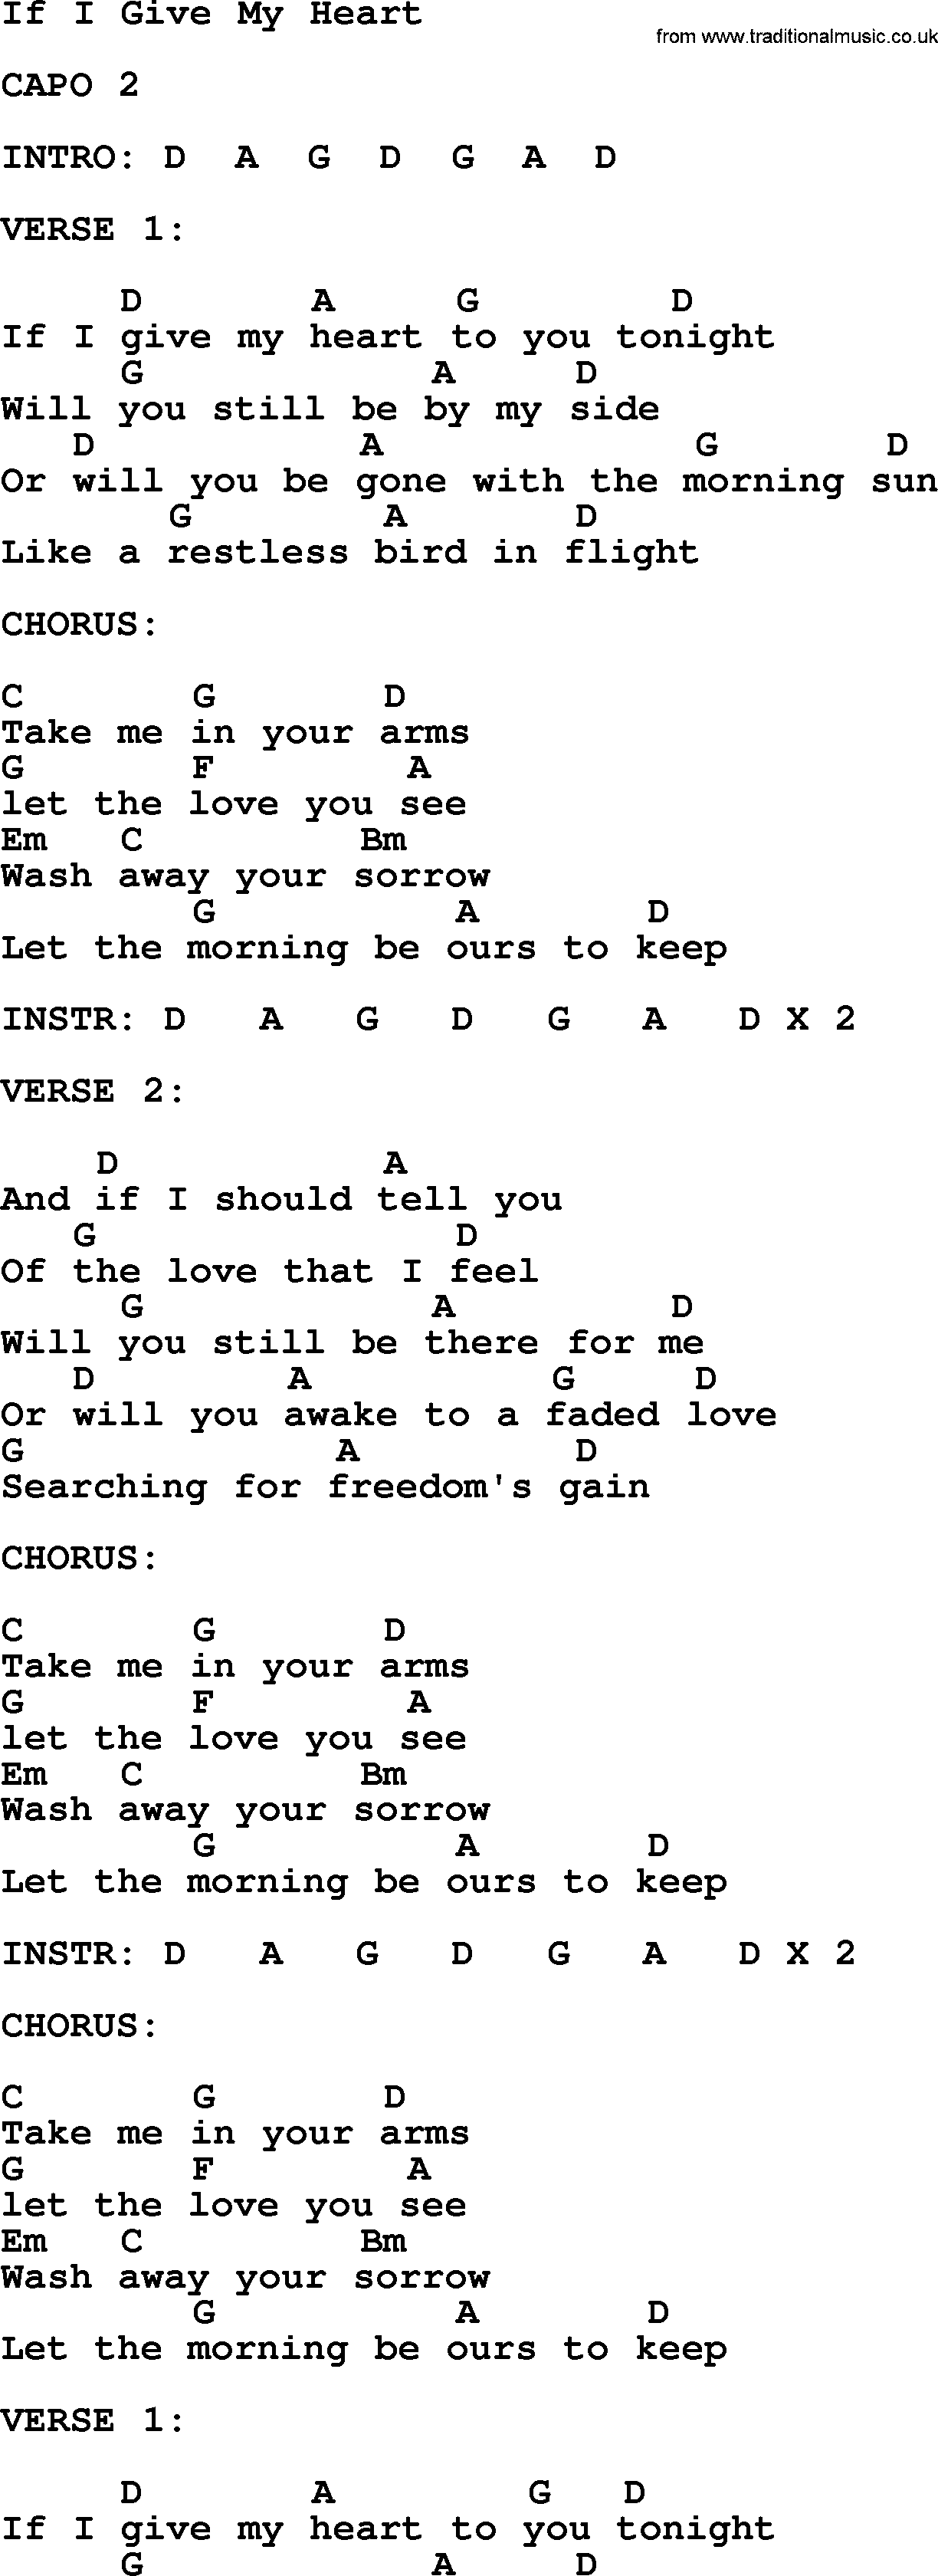 Bluegrass song: If I Give My Heart, lyrics and chords